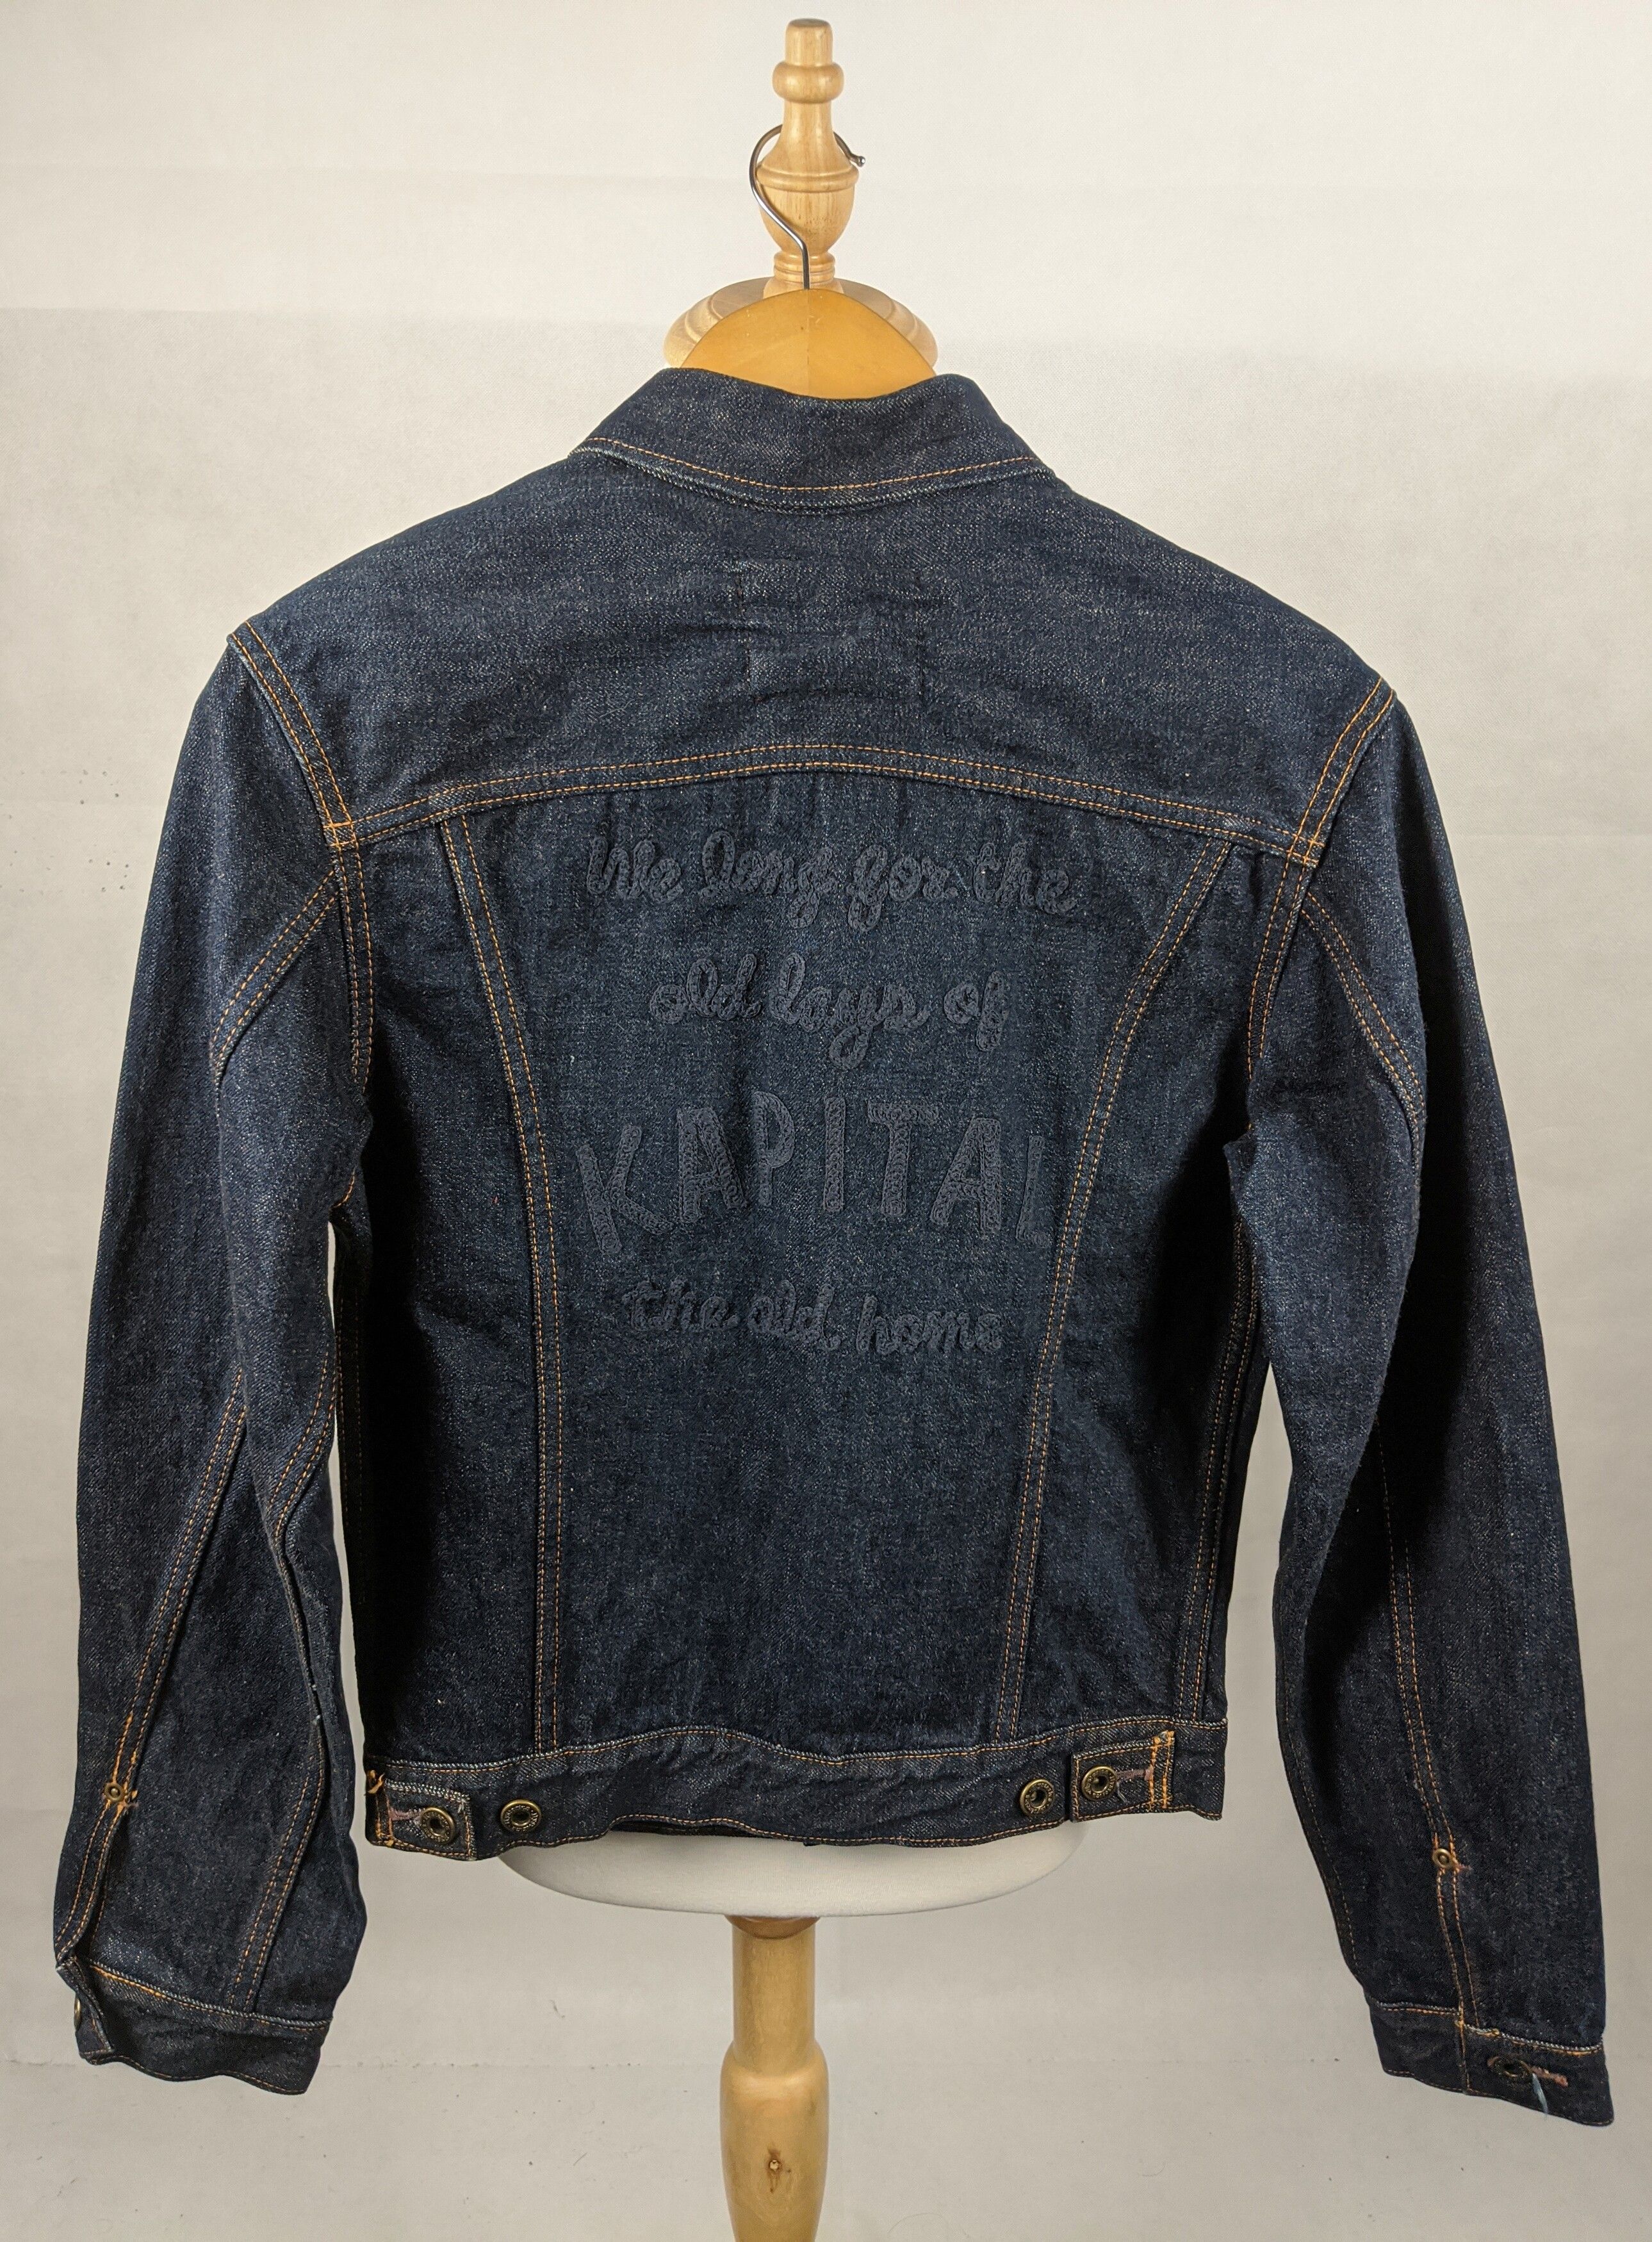 Denime Hysteric Kapital Buttonfly Jeans Jacket - 2